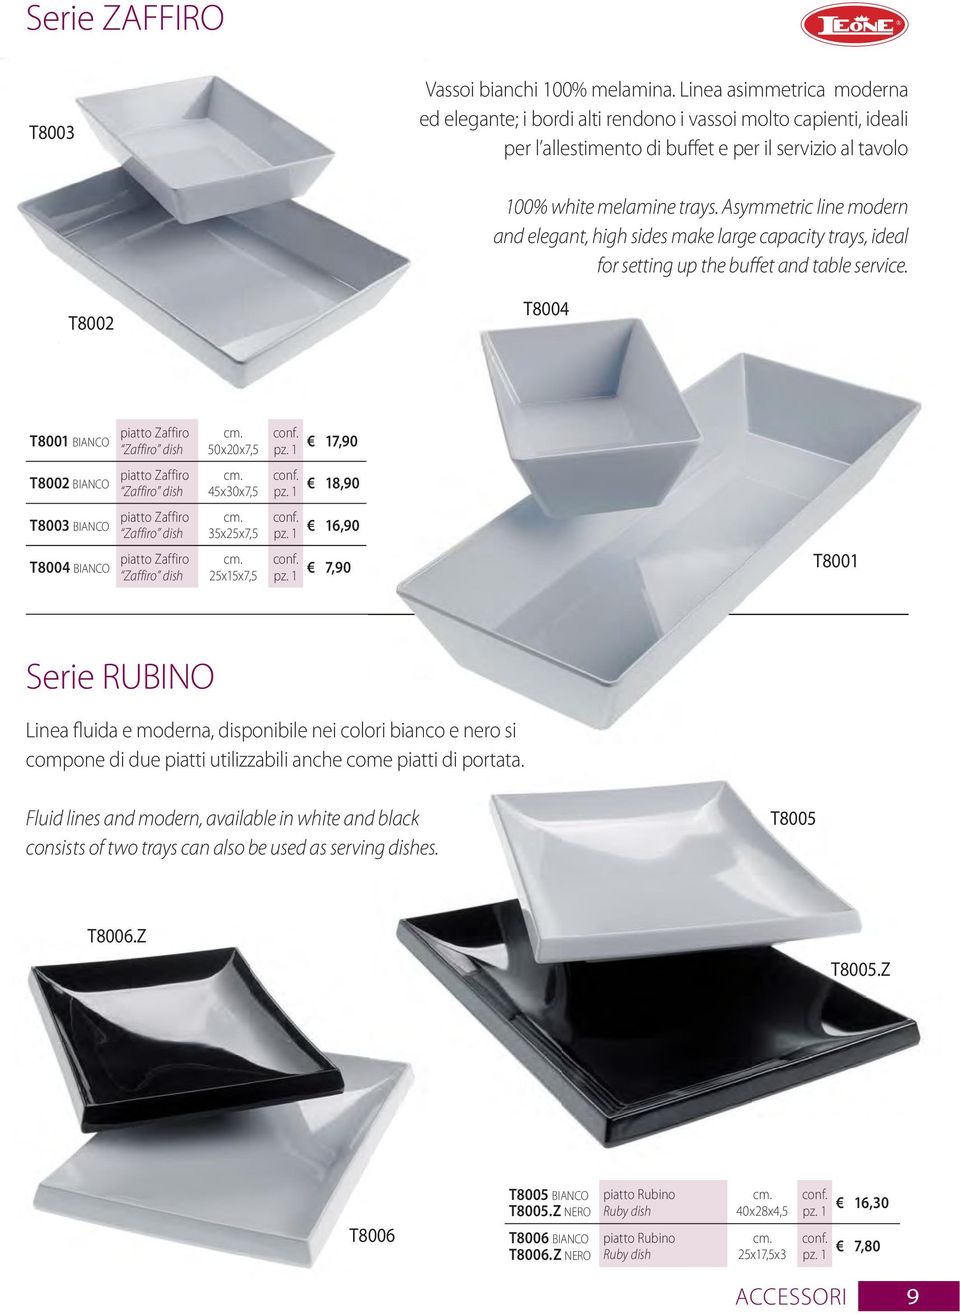 Asymmetric line modern and elegant, high sides make large capacity trays, ideal for setting up the buffet and table service.